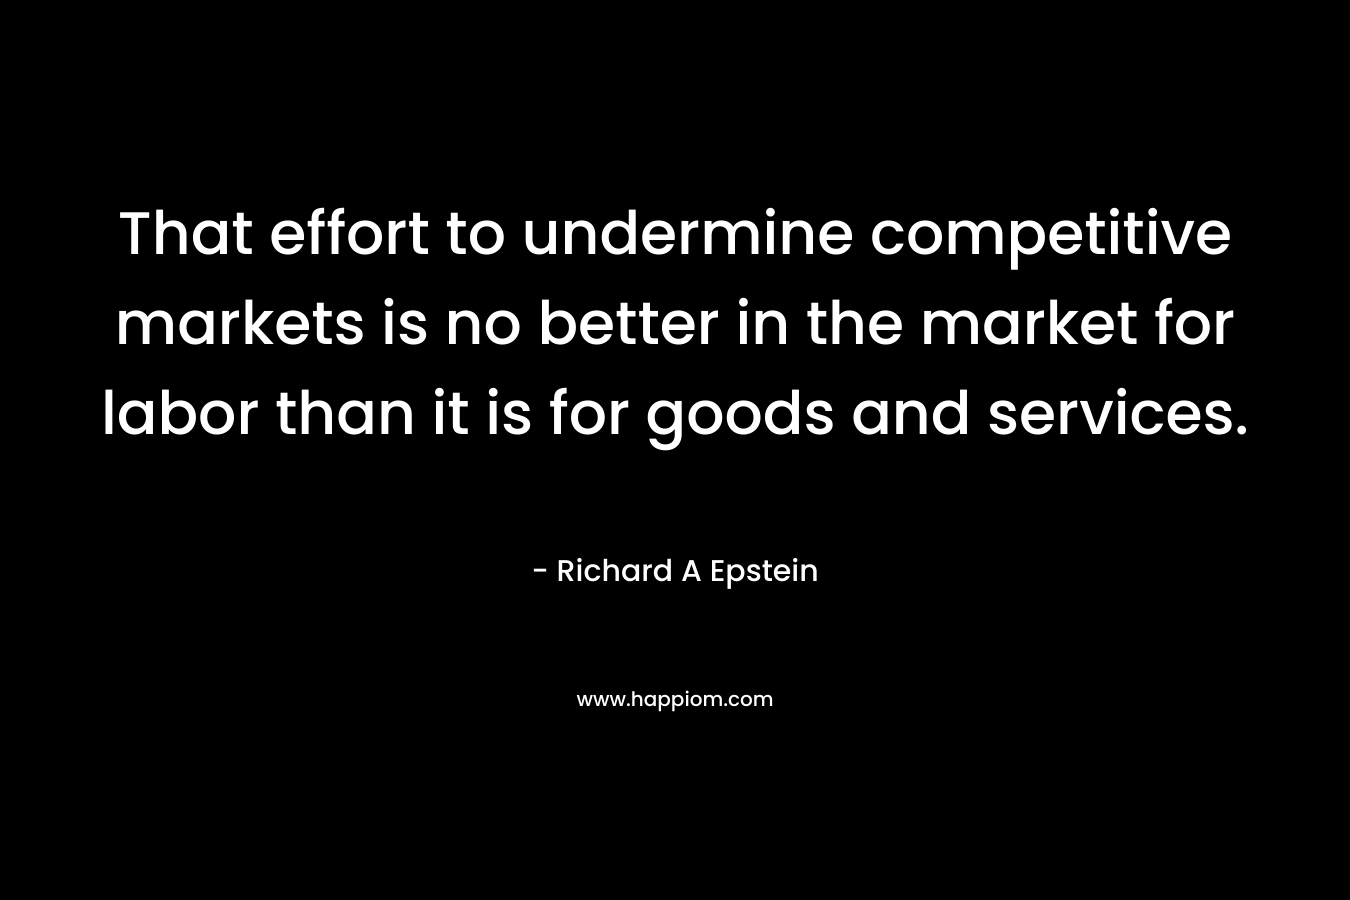 That effort to undermine competitive markets is no better in the market for labor than it is for goods and services. – Richard A Epstein